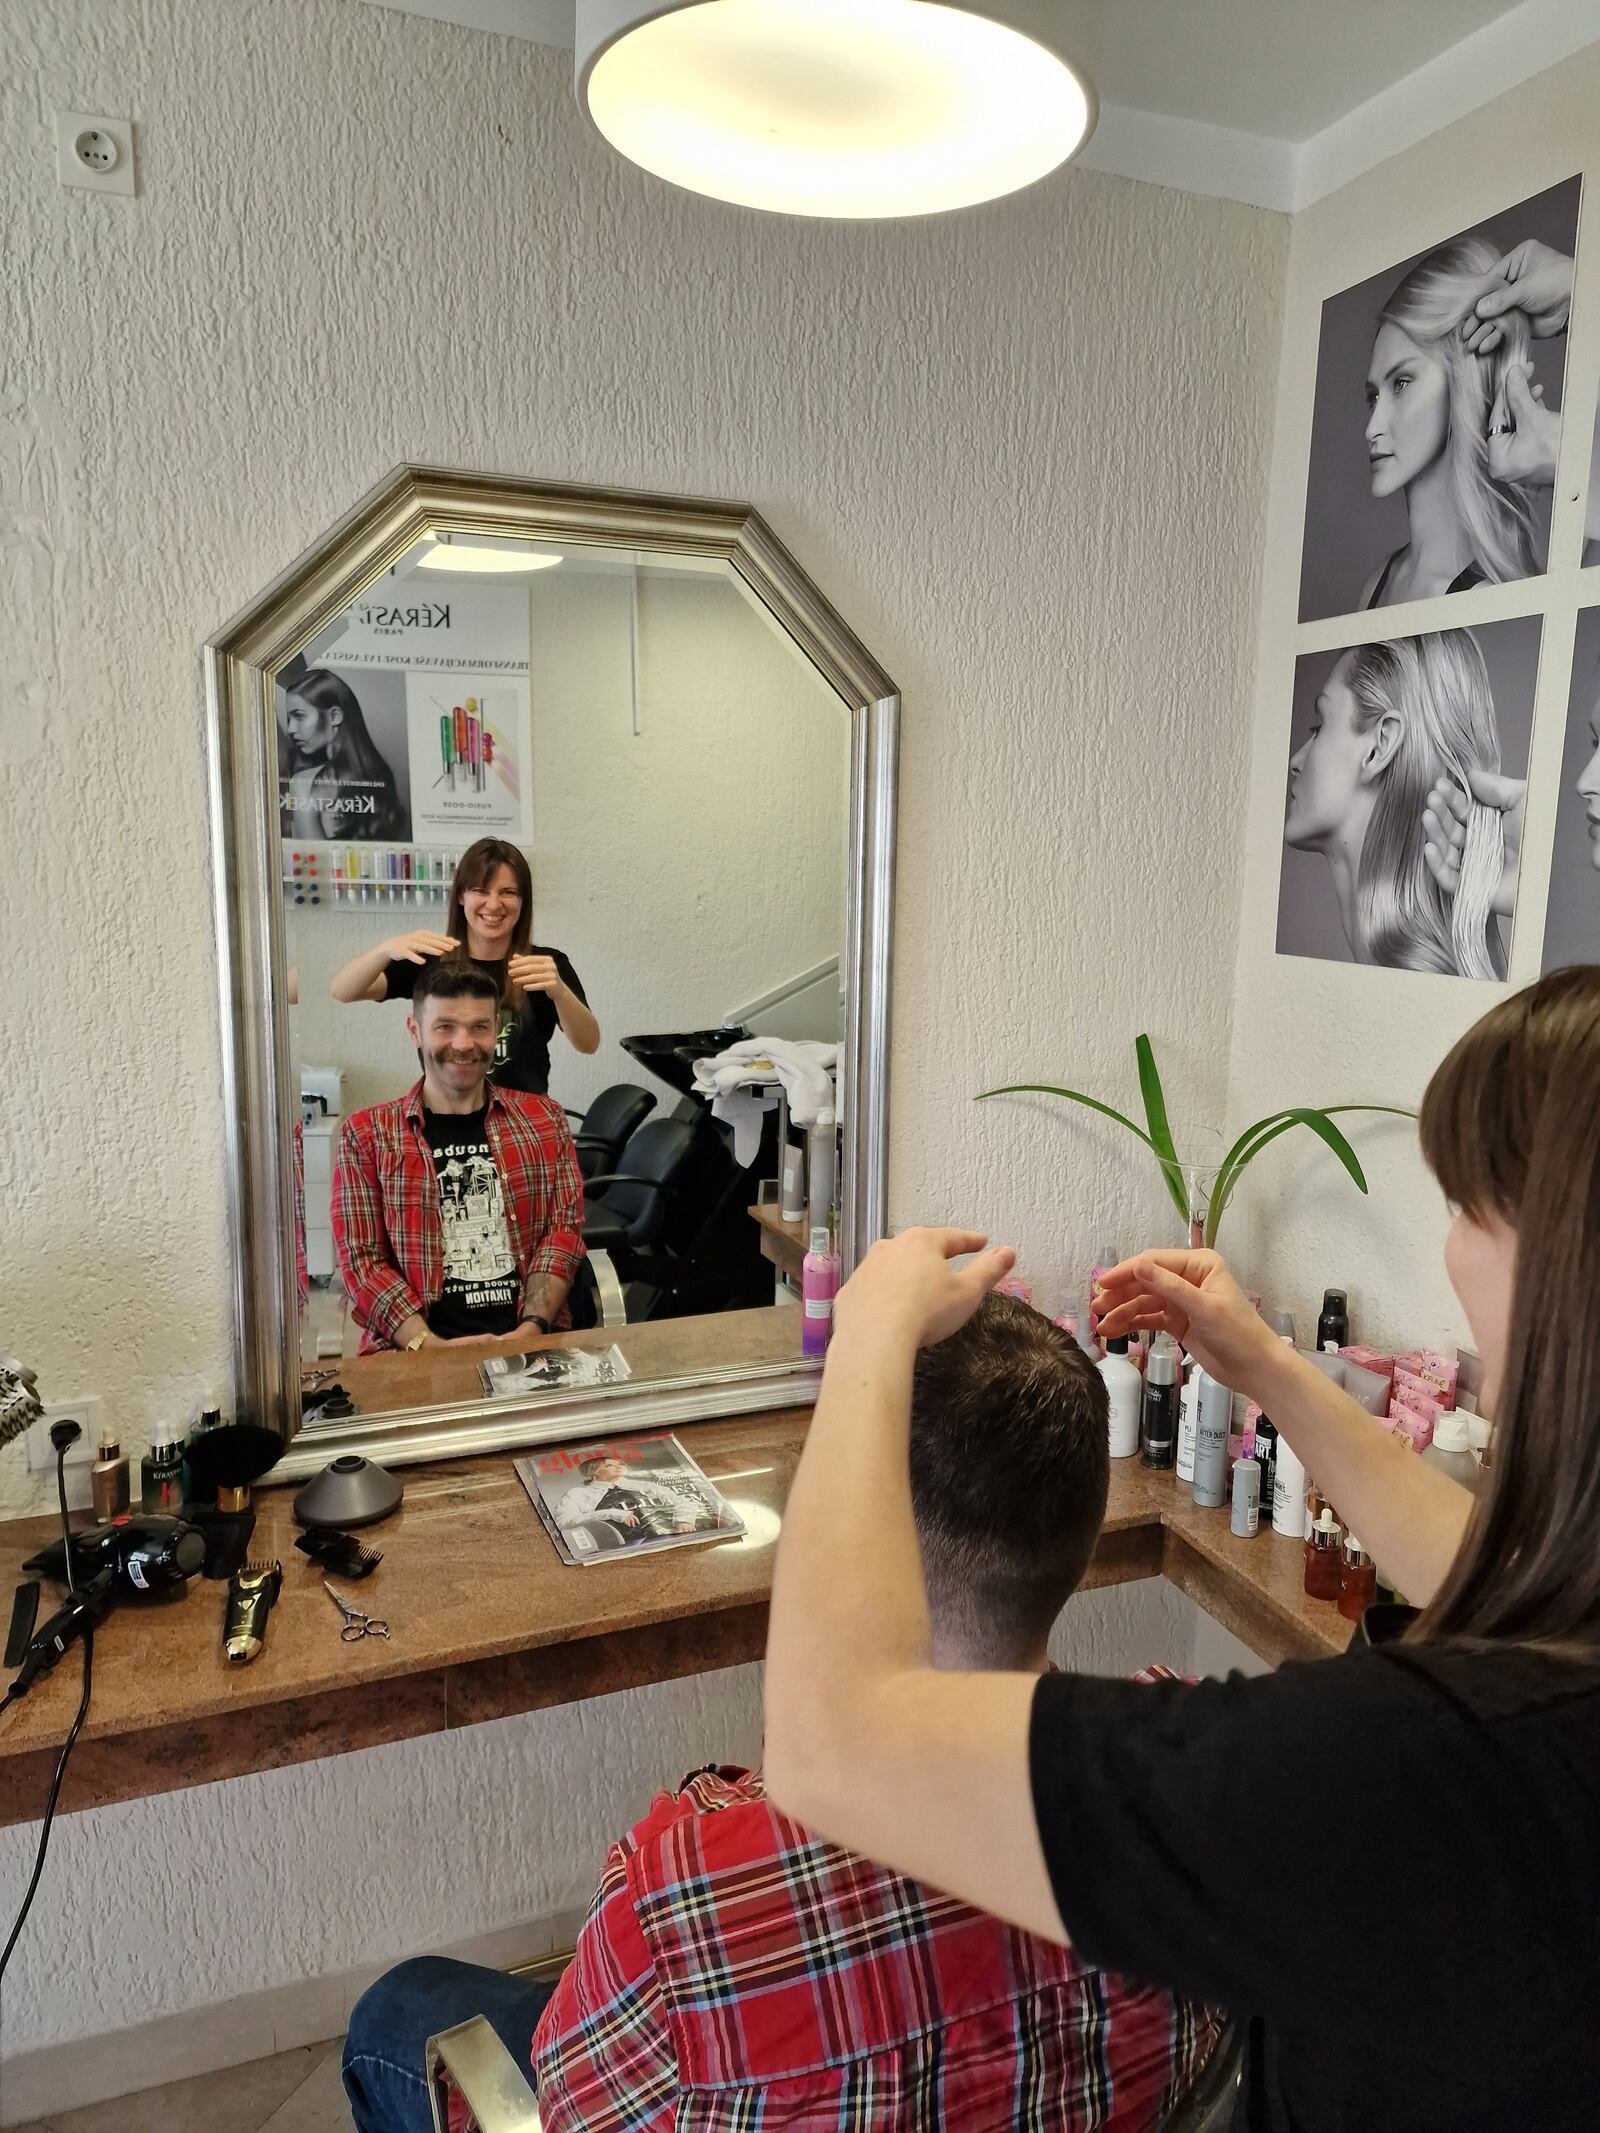 man getting his haircut by a woman reflected in a mirror